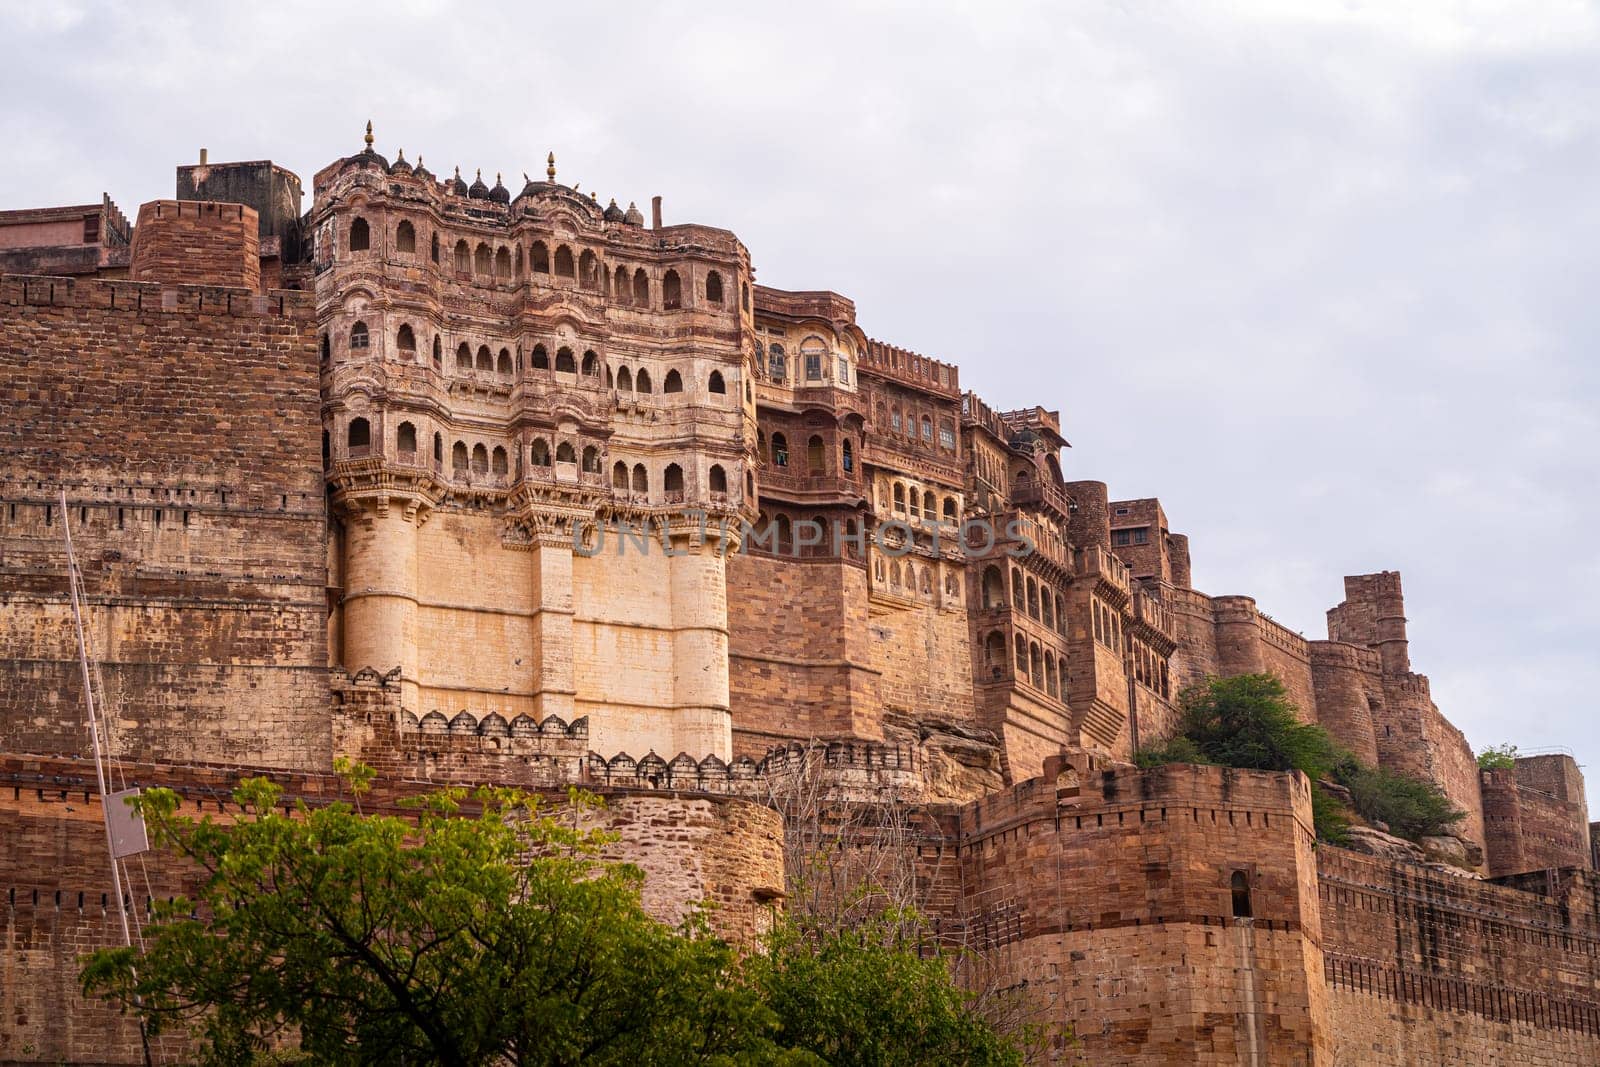 majestic stone walls of mehrangarh fort with window arches in jodhpur sitting on top of hill surrounded by monsoon clouds with birds flying around this landmark of rajput warrior history India